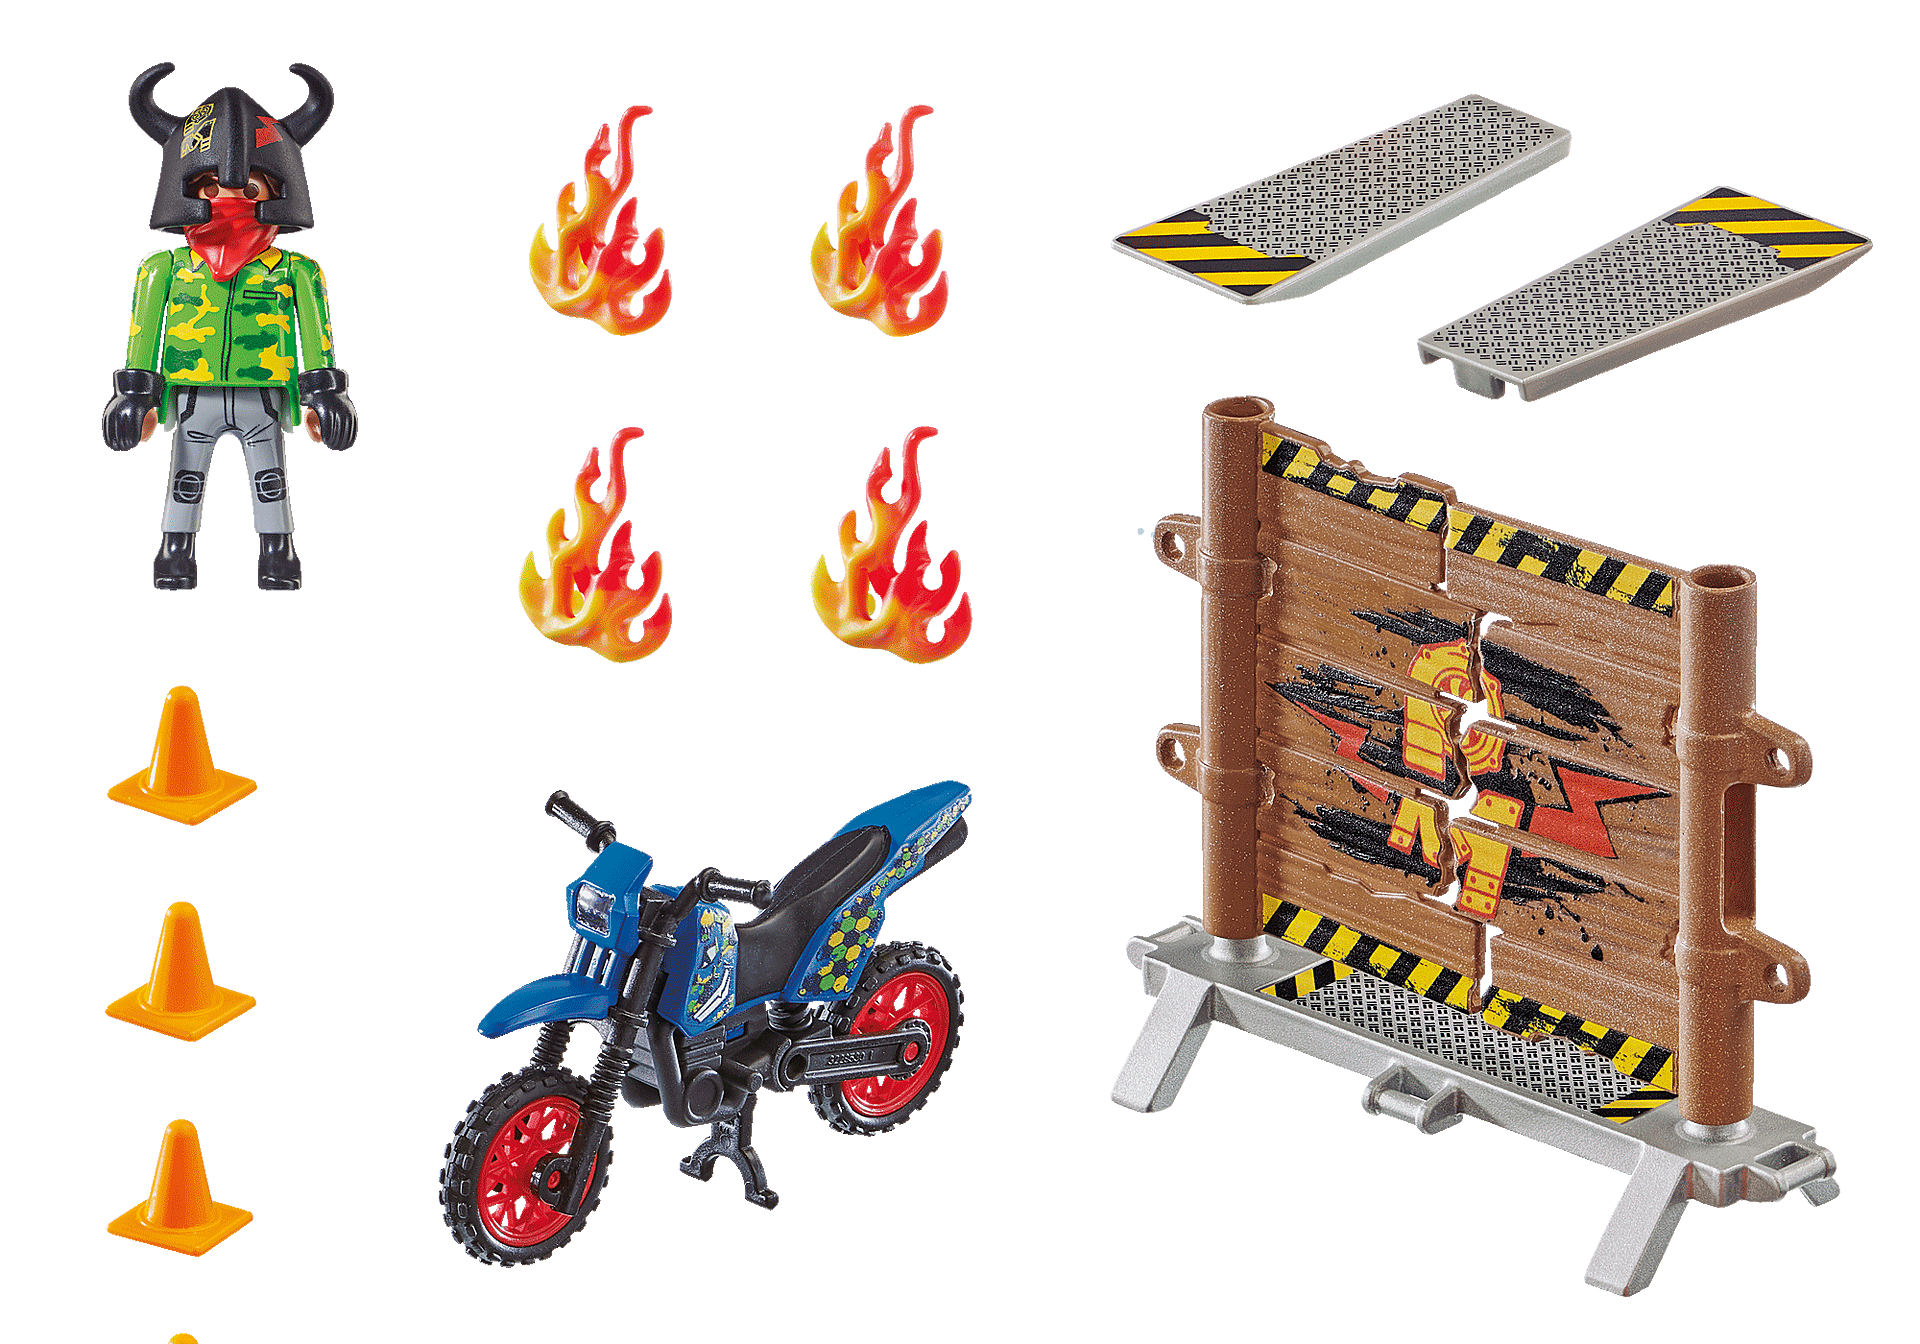 70553 Stunt Show Motocross with Fiery Wall zoom image3